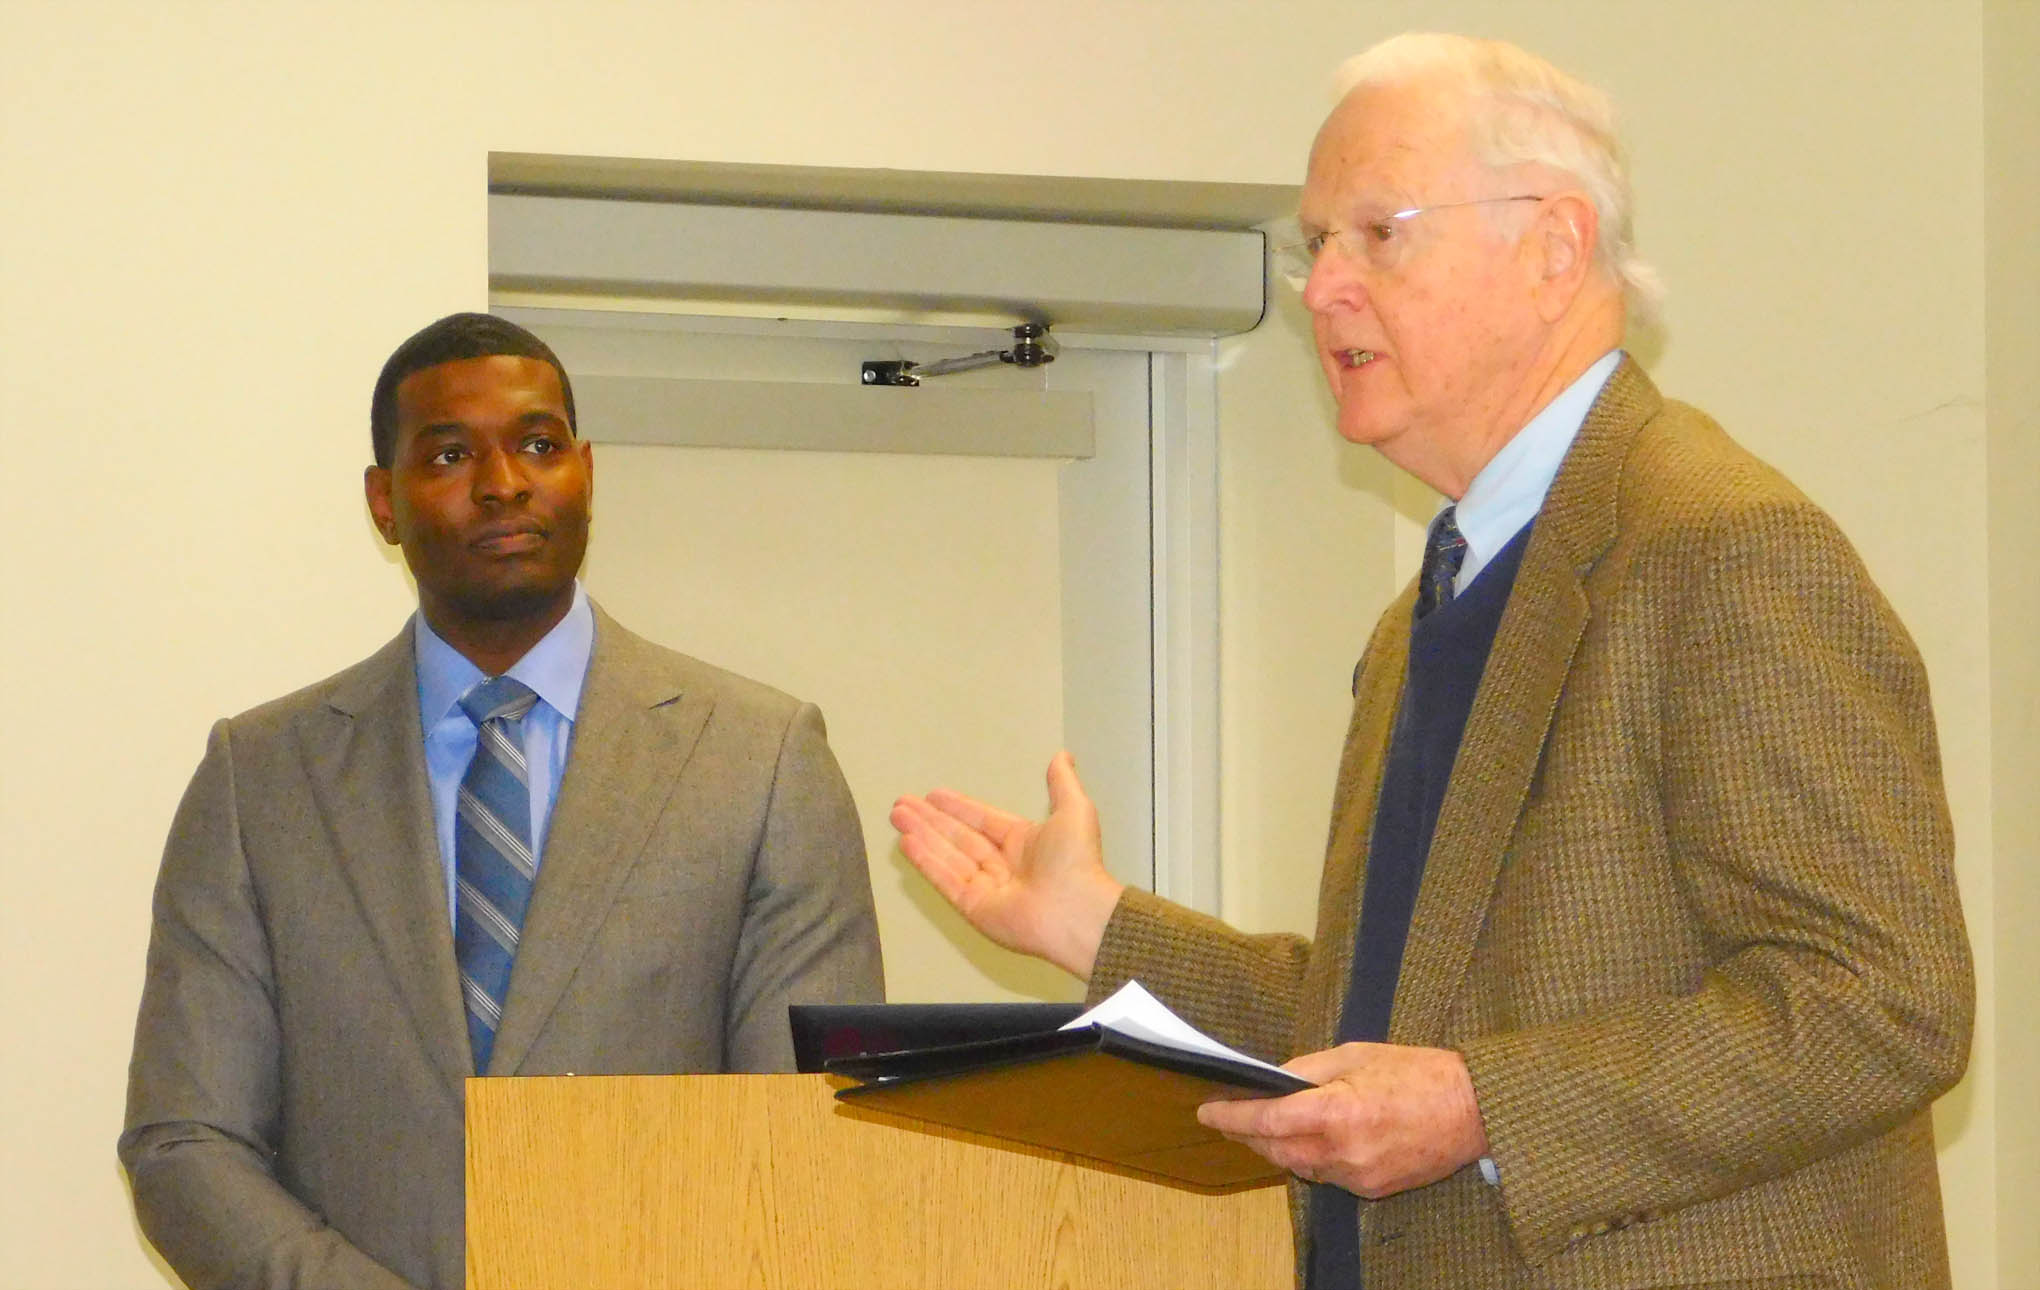 Click to enlarge,  Michael S. Regan (left), Secretary of the N.C. Department of Environmental Quality, who was the speaker for Central Carolina Community College's second sustainable speaker series, is pictured with Richard Hayes (right). The event was sponsored by the Richard and Rebecca Hayes Endowed Lecture Fund for Environmental Policy and Stewardship through the CCCC Foundation. 